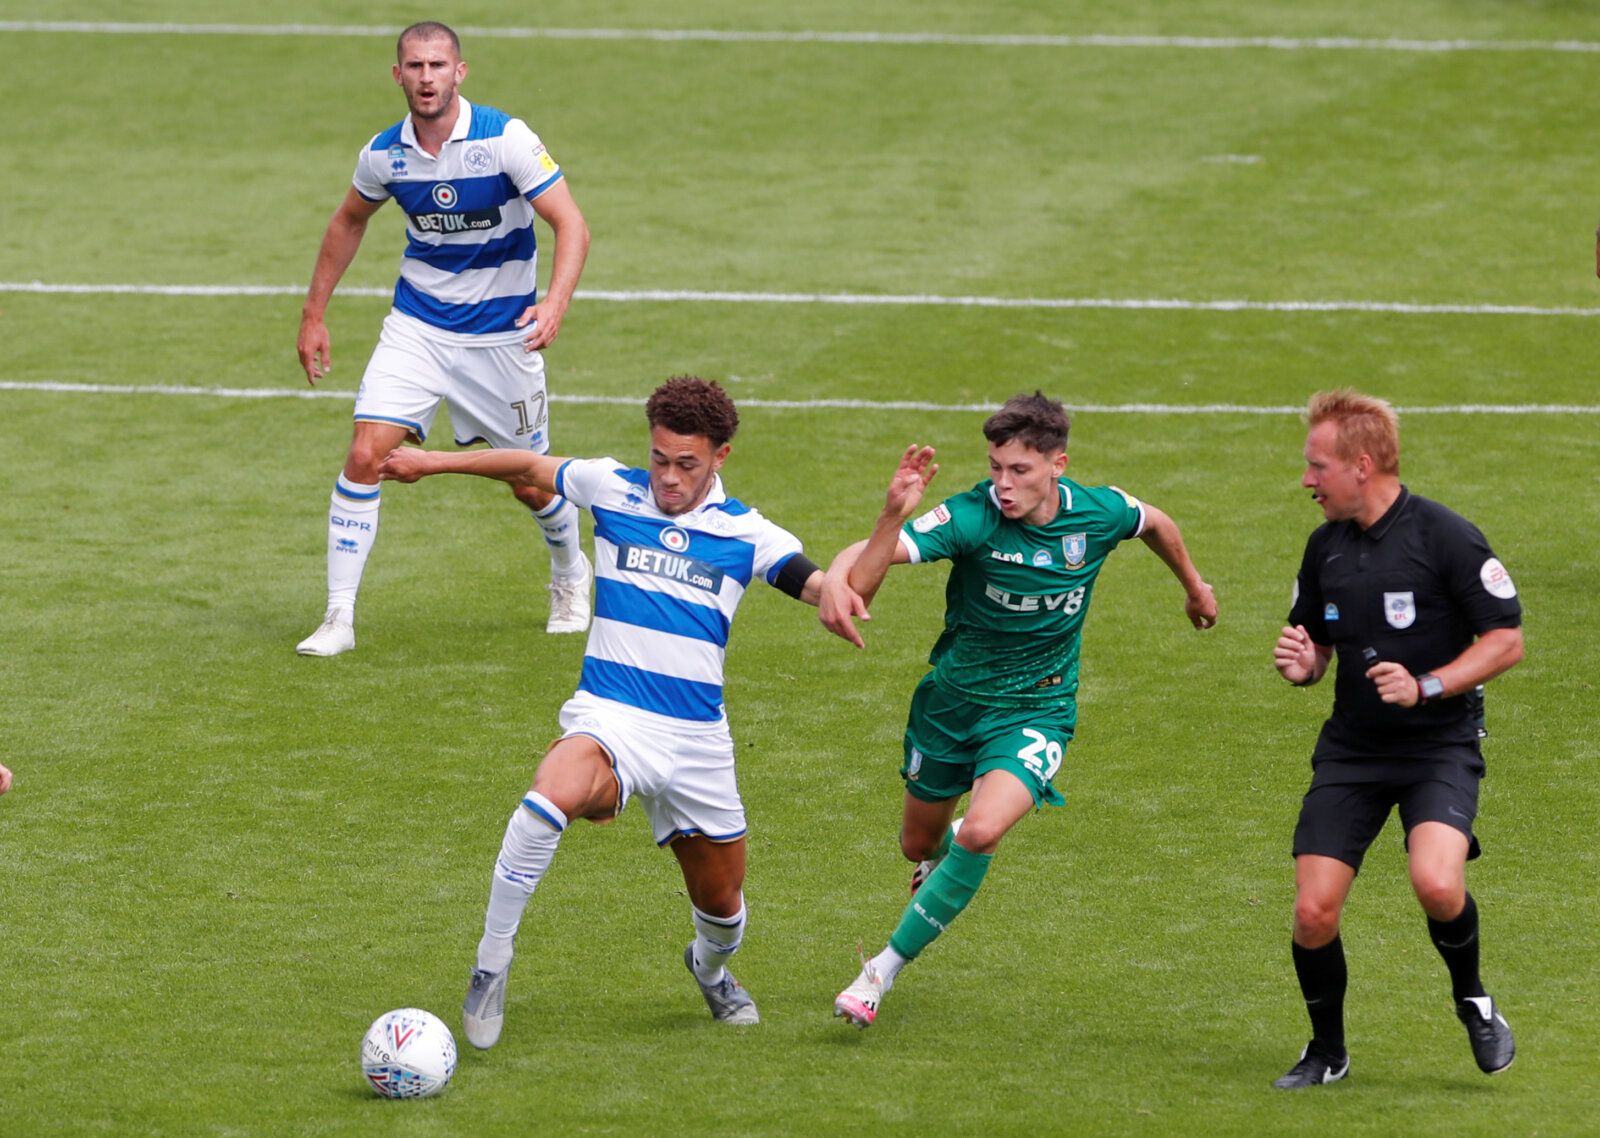 Soccer Football - Championship - Queens Park Rangers v Sheffield Wednesday - Loftus Park, London, Britain - July 11, 2020   Queens Park Rangers' Luke Amos in action with Sheffield Wednesday's Alex Hunt, as play resumes behind closed doors following the outbreak of the coronavirus disease (COVID-19)   Action Images/Andrew Couldridge    EDITORIAL USE ONLY. No use with unauthorized audio, video, data, fixture lists, club/league logos or 